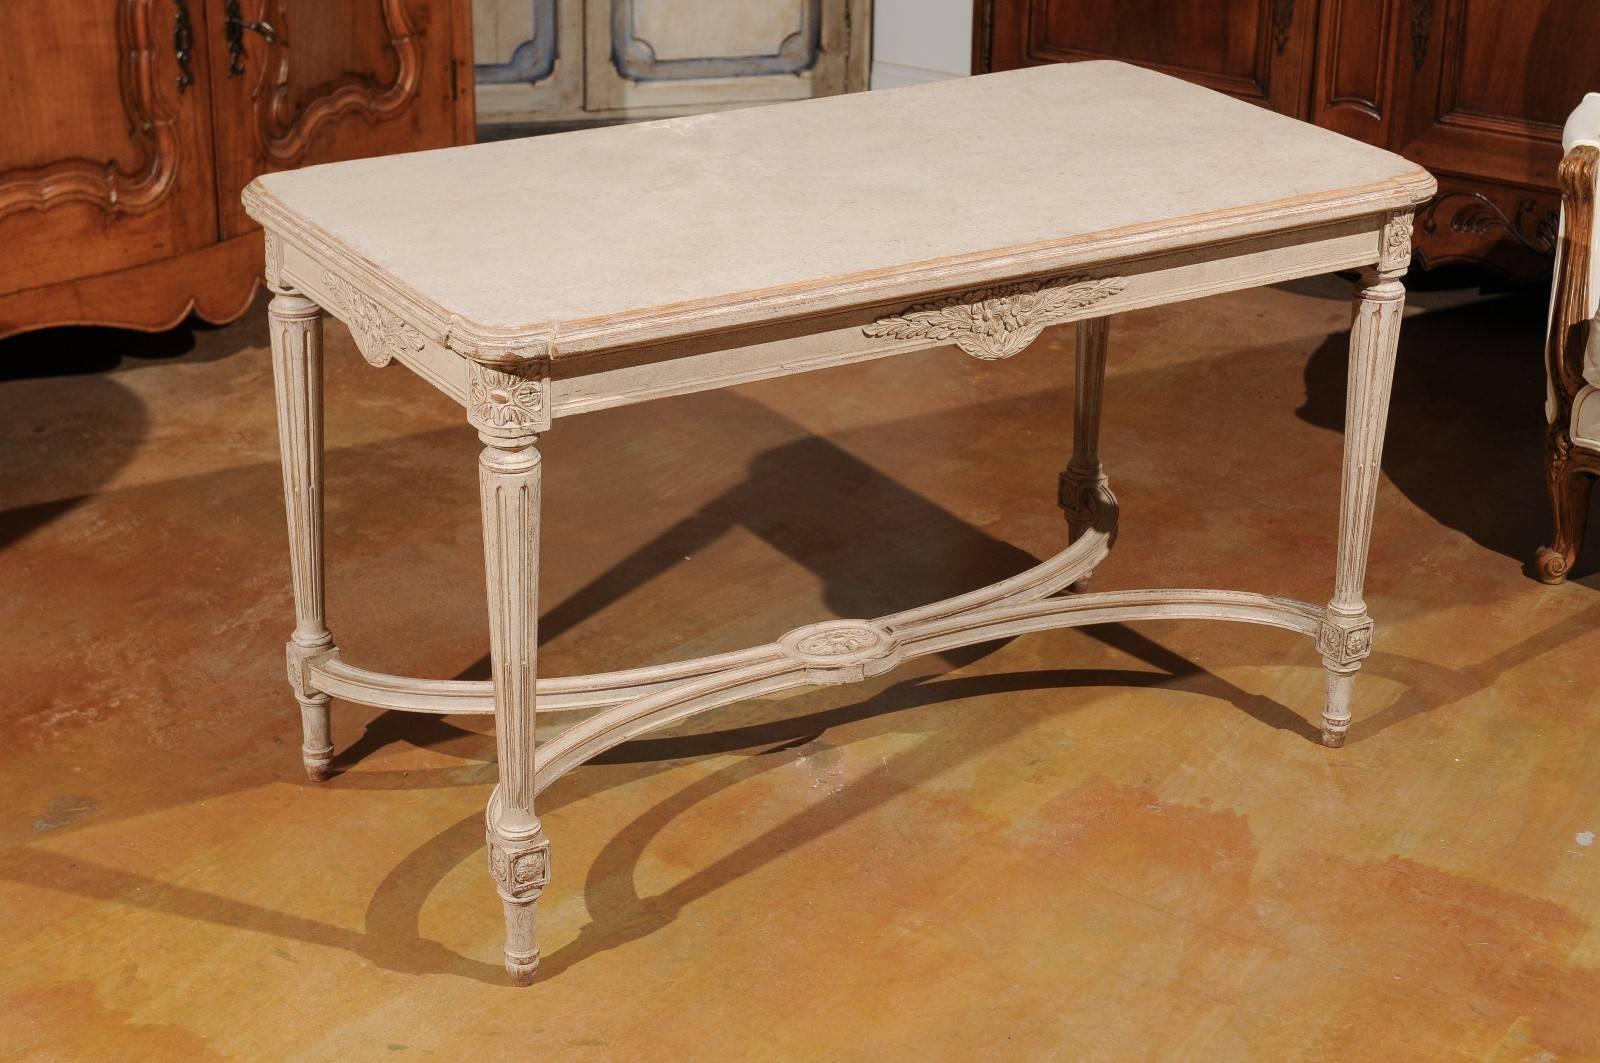 Swedish Gustavian Style Painted Wood Tea Table with Fluted Legs, circa 1920 For Sale 4